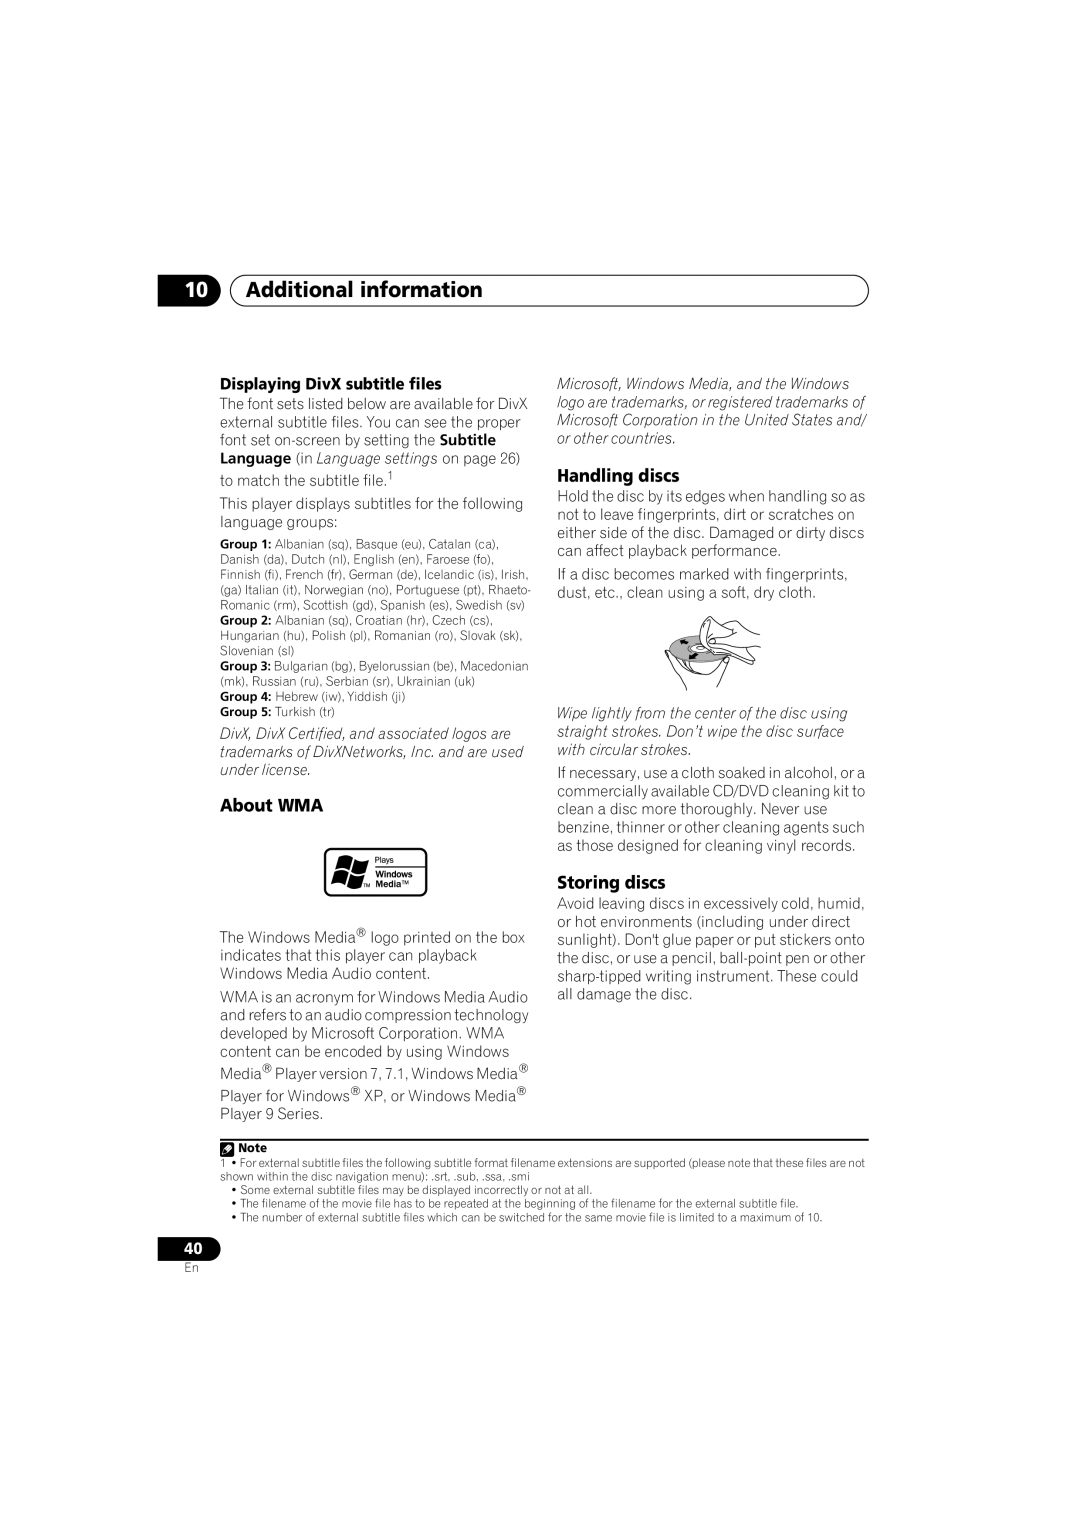 Pioneer S-DV434ST manual About WMA, Handling discs, Storing discs, Displaying DivX subtitle files, 10Additional information 